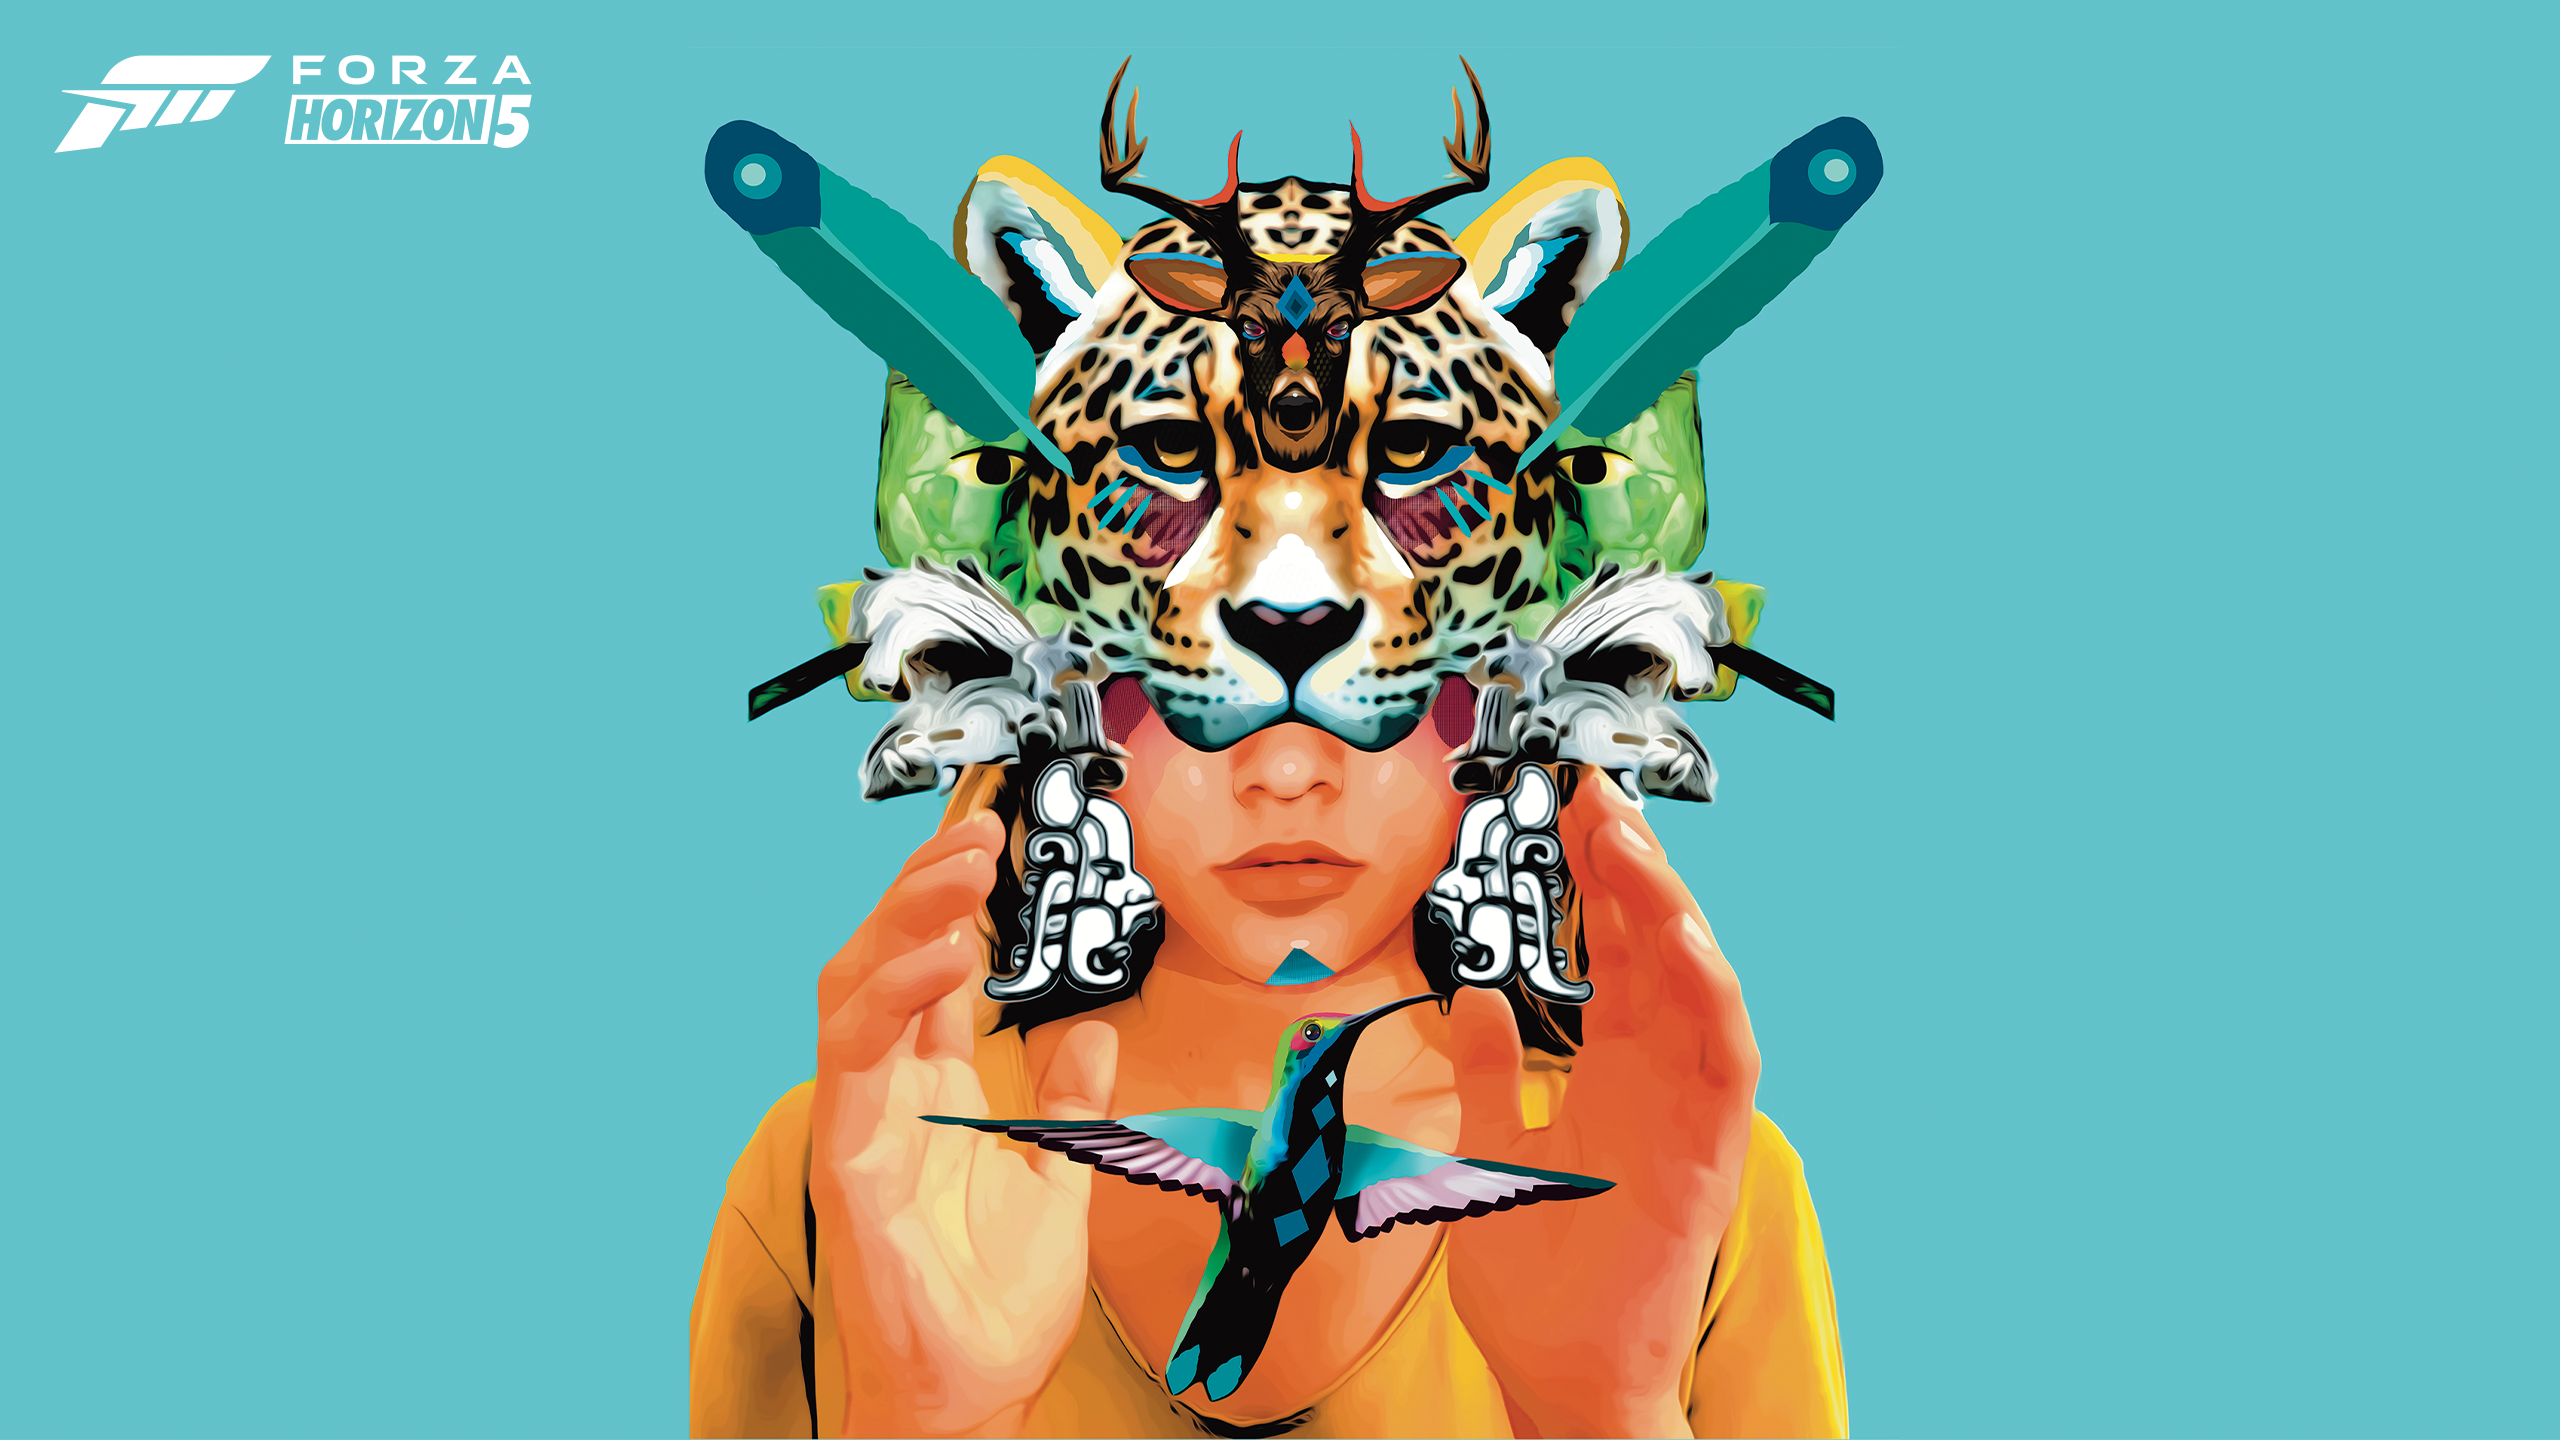 Forza Horizon 5 themed HD desktop wallpaper featuring vibrant artwork with a surreal design of a person holding a colorful animal mask, on a teal background.